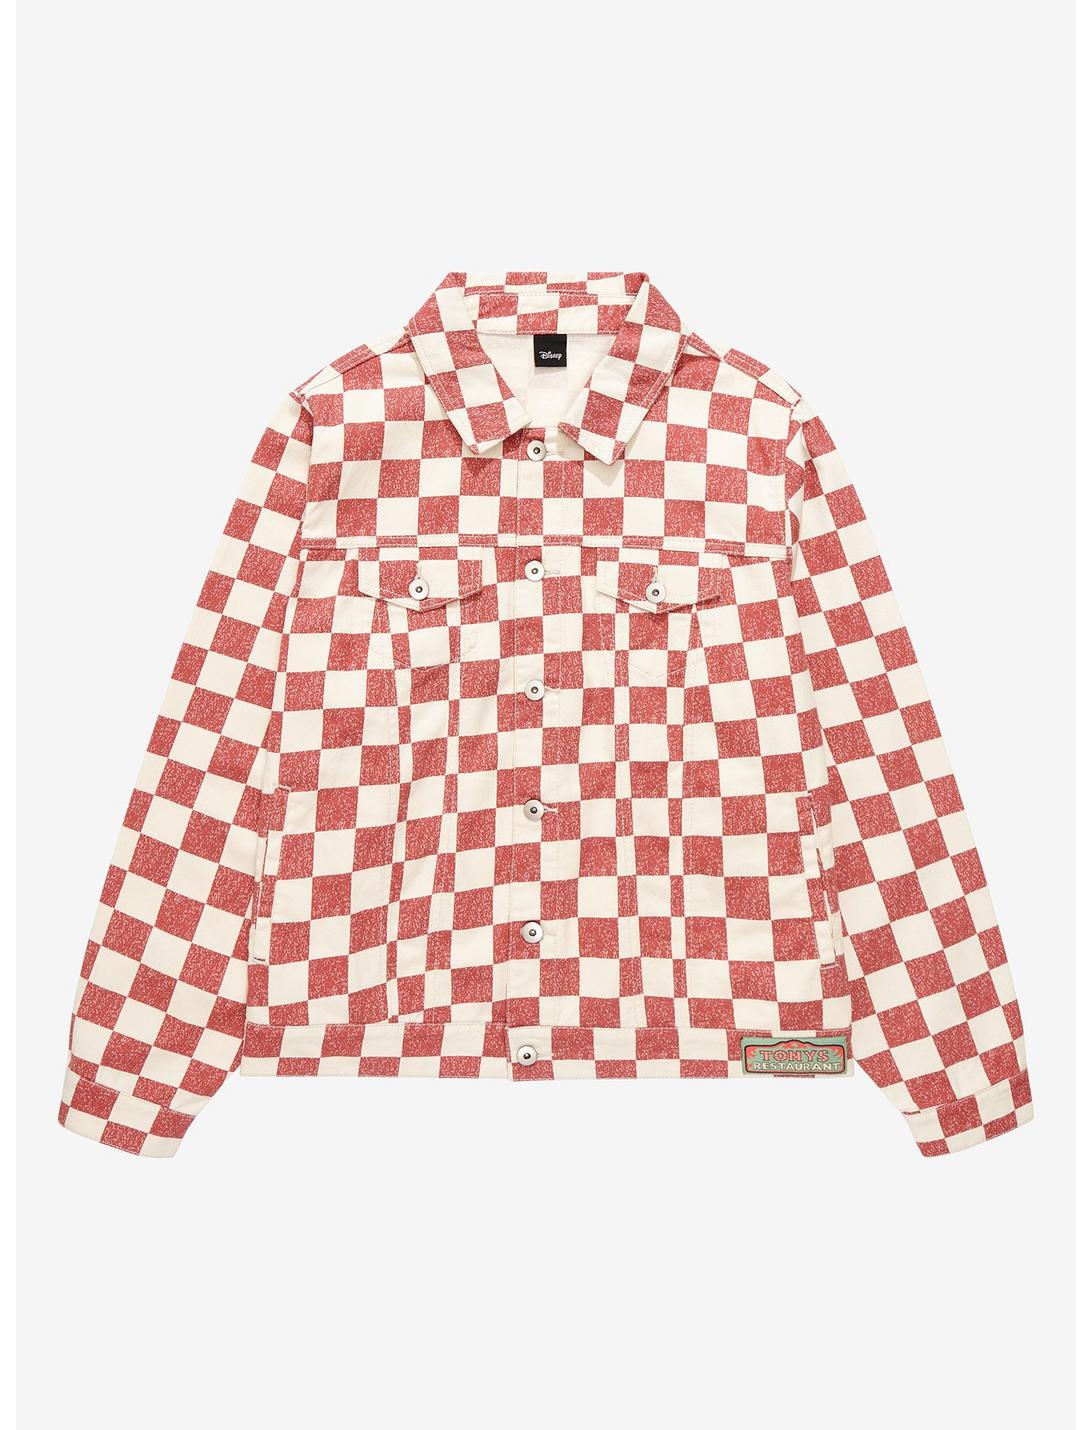 Disney Lady and the Tramp Tony's Restaurant Checkered Plus Size Denim Jacket - BoxLunch Exclusive, MULTI, hi-res